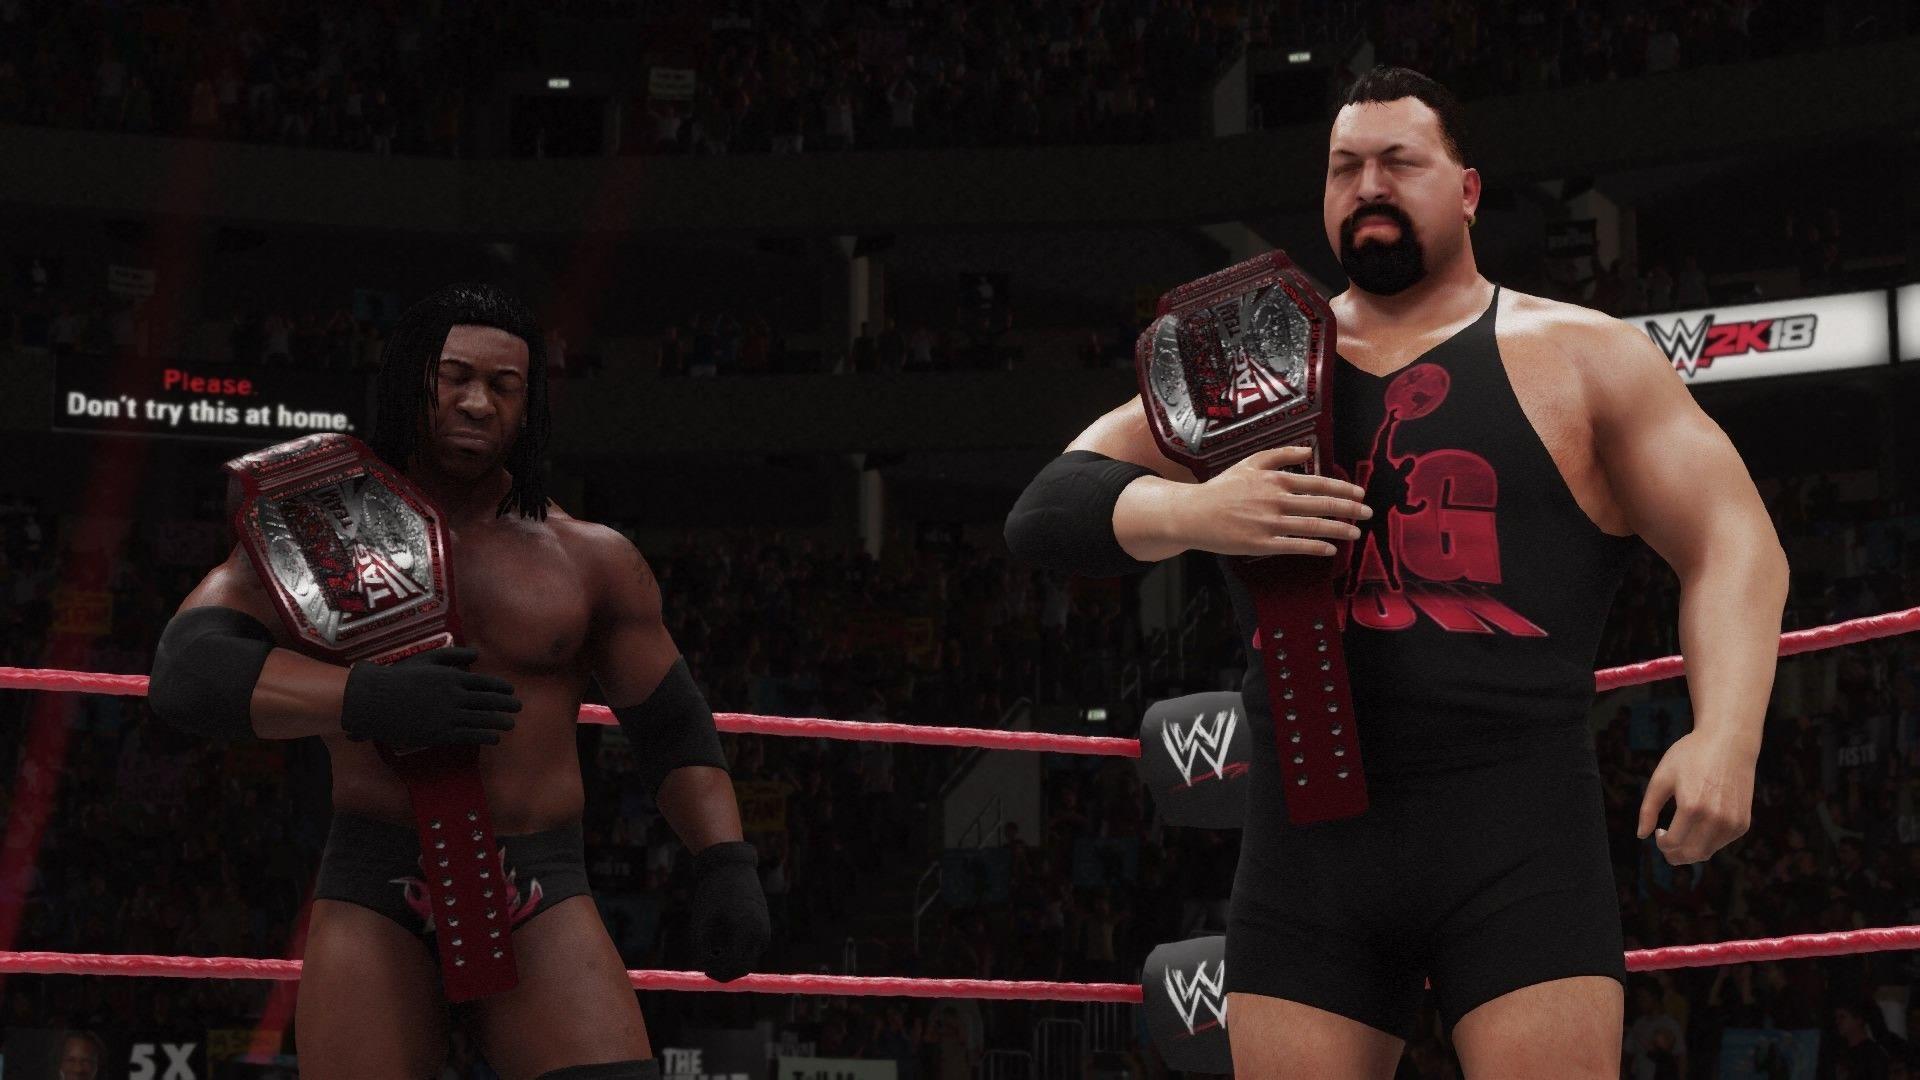 Booker T and Big Show: Tag Team Champions of Raw. (WWE 2K18) My own